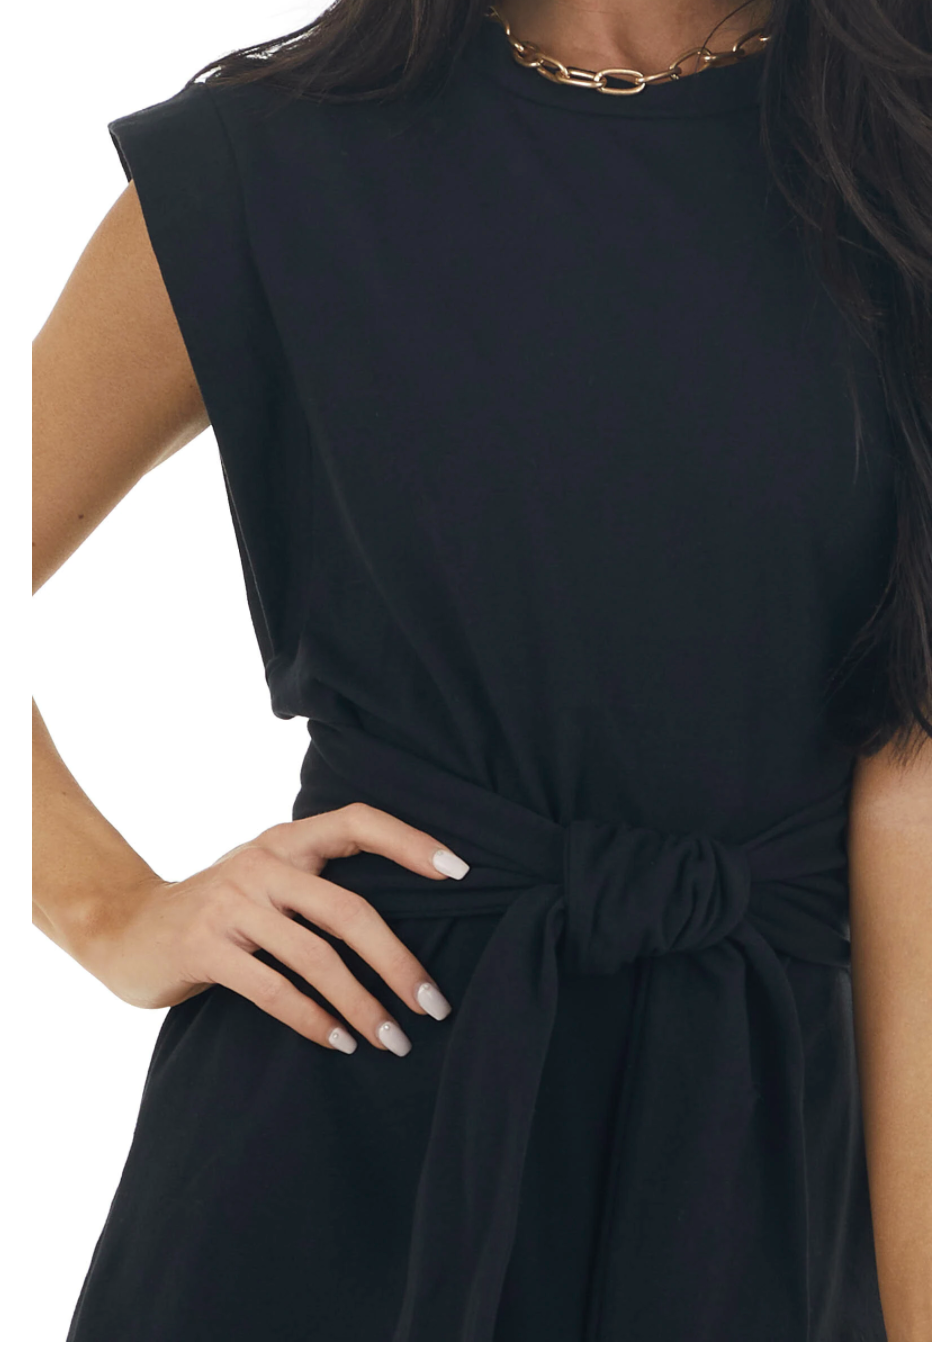 Black Cap Sleeves Short Dress With Front Tie Detail